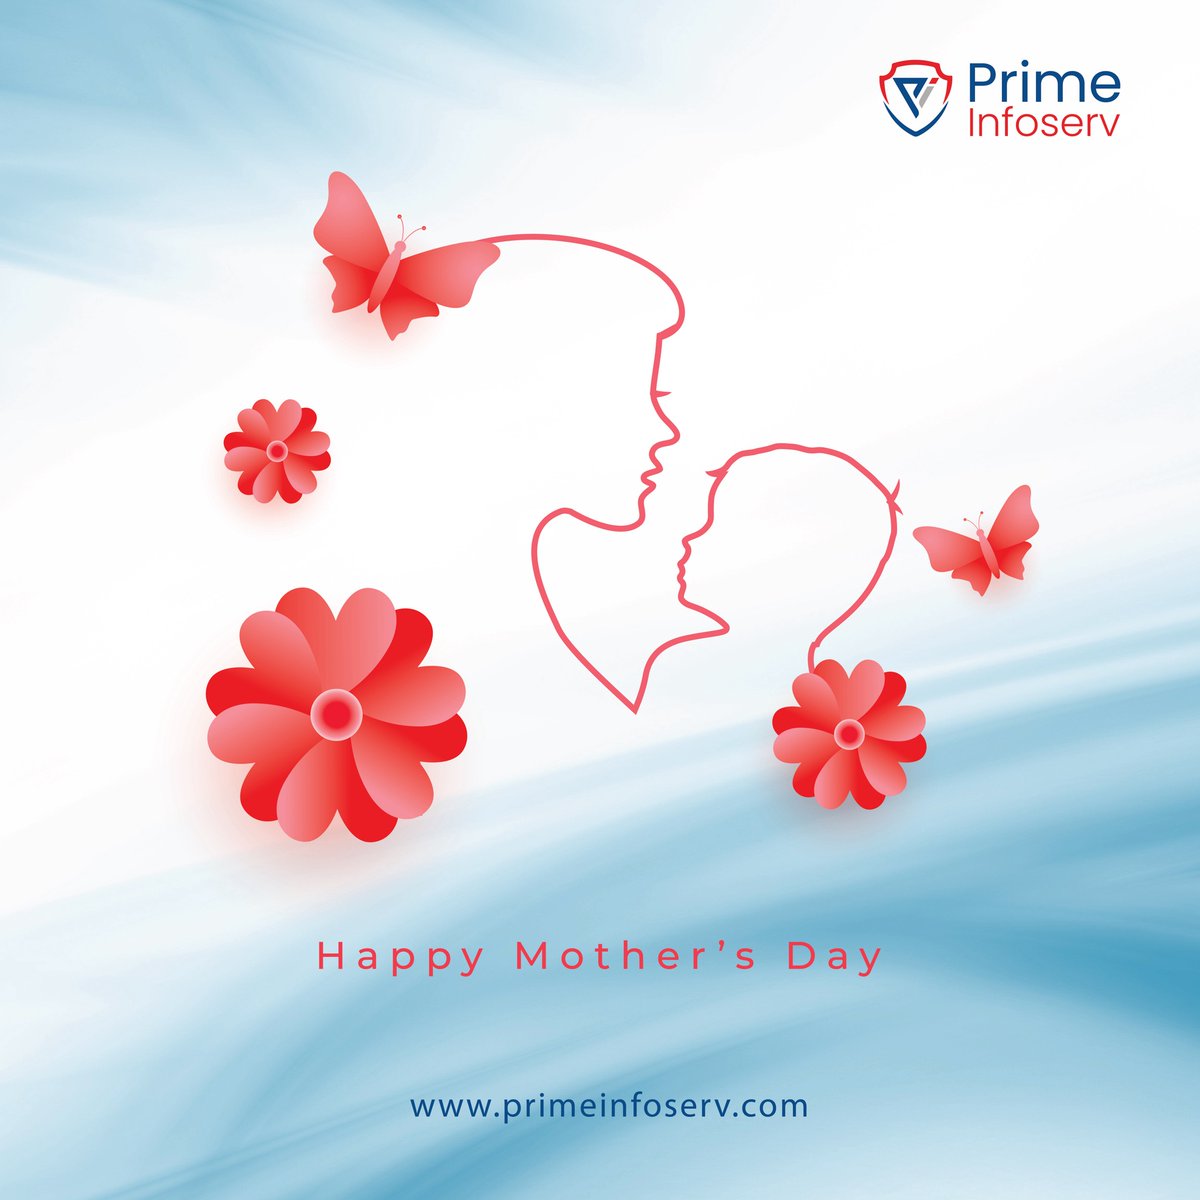 🌸 Happy Mother’s Day! Just like moms protect their families, we’re here to protect your digital world. Stay Vigilant to secure your digital transformation journey 🌐🔒  #prime #primeinfoserv #mothersday #cyber #cybersecurity #grc #mssp